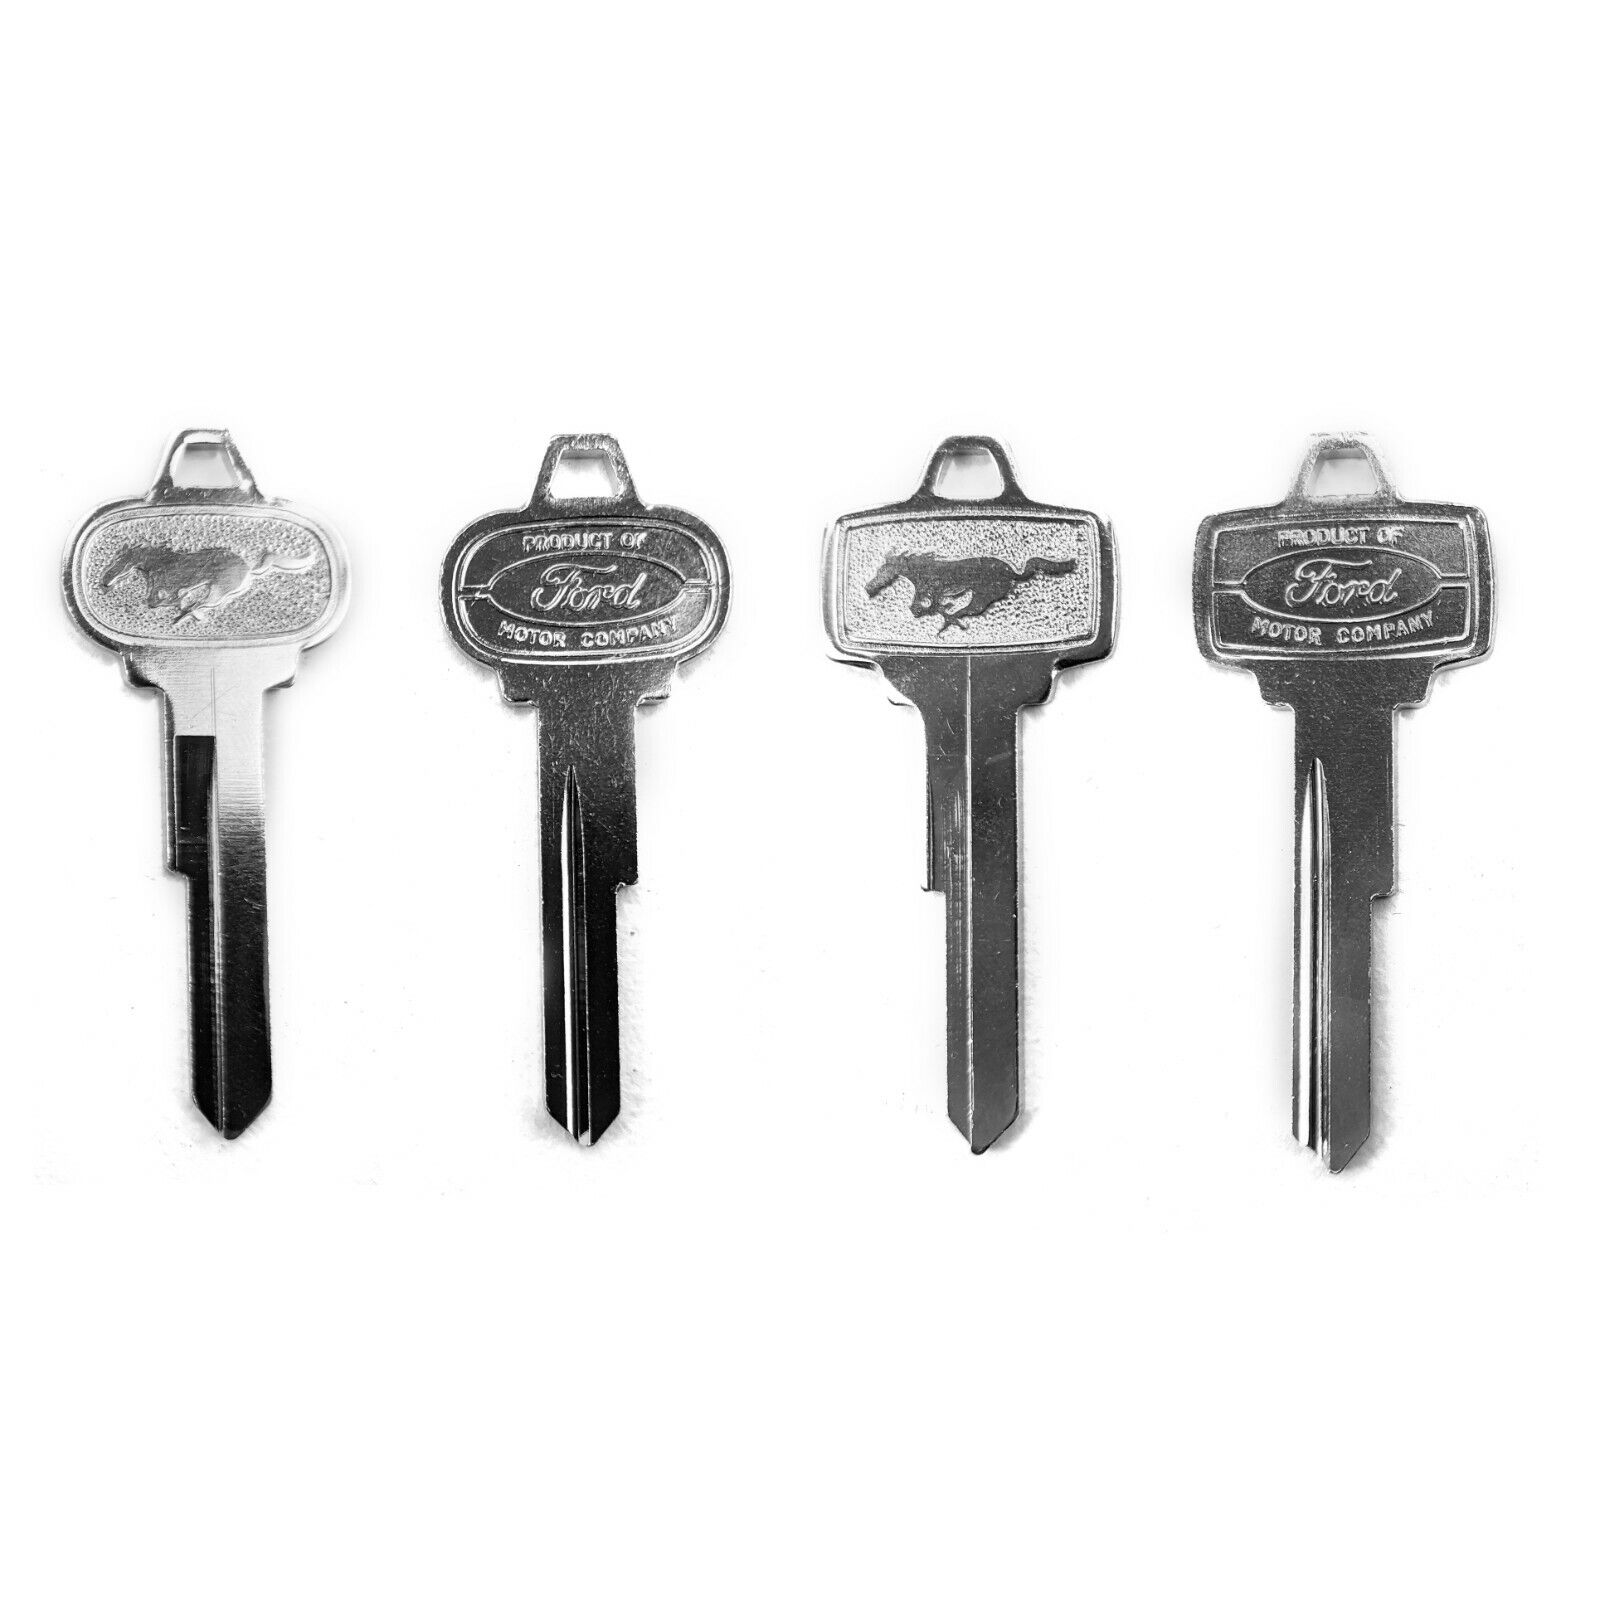 Mustang Key Blank Set of 4 Ignition and Trunk Original Style 1964 1965 1966